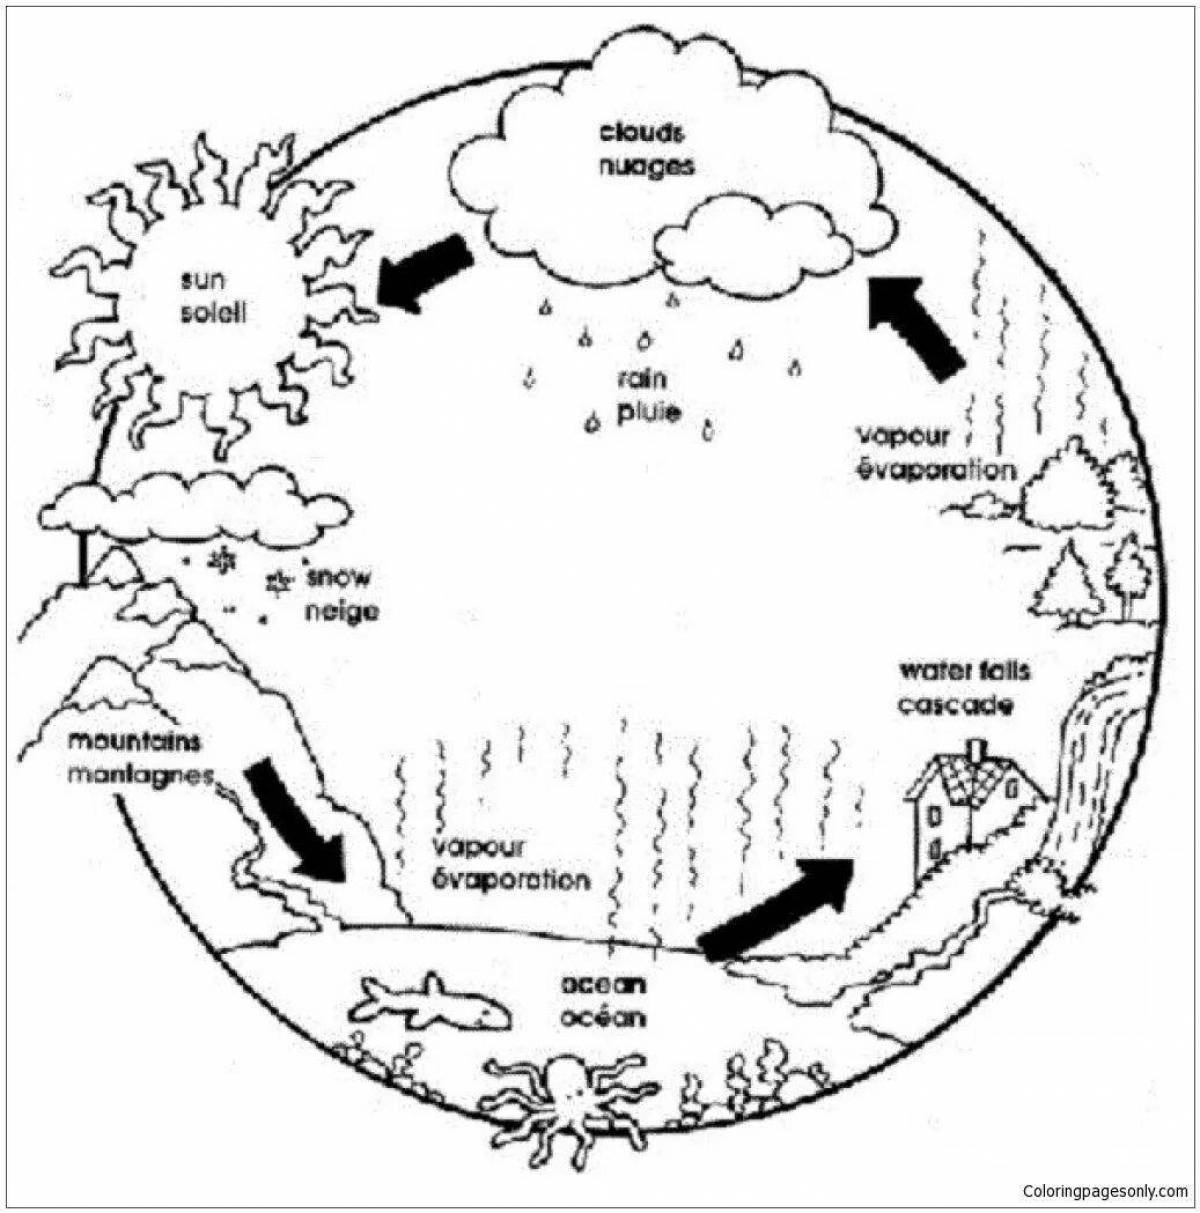 A fascinating water cycle in nature for children